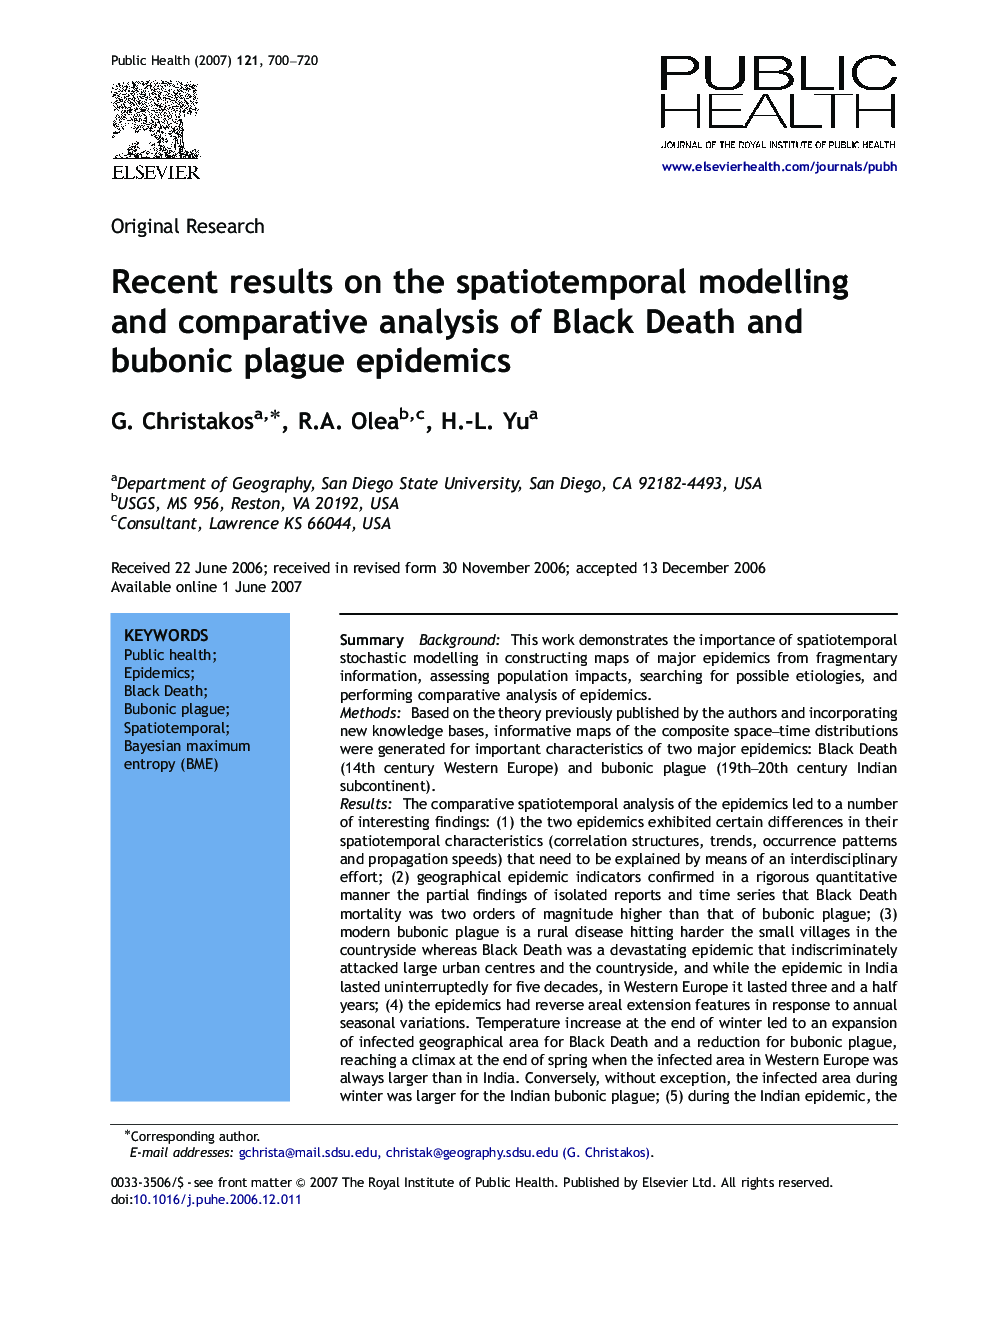 Recent results on the spatiotemporal modelling and comparative analysis of Black Death and bubonic plague epidemics